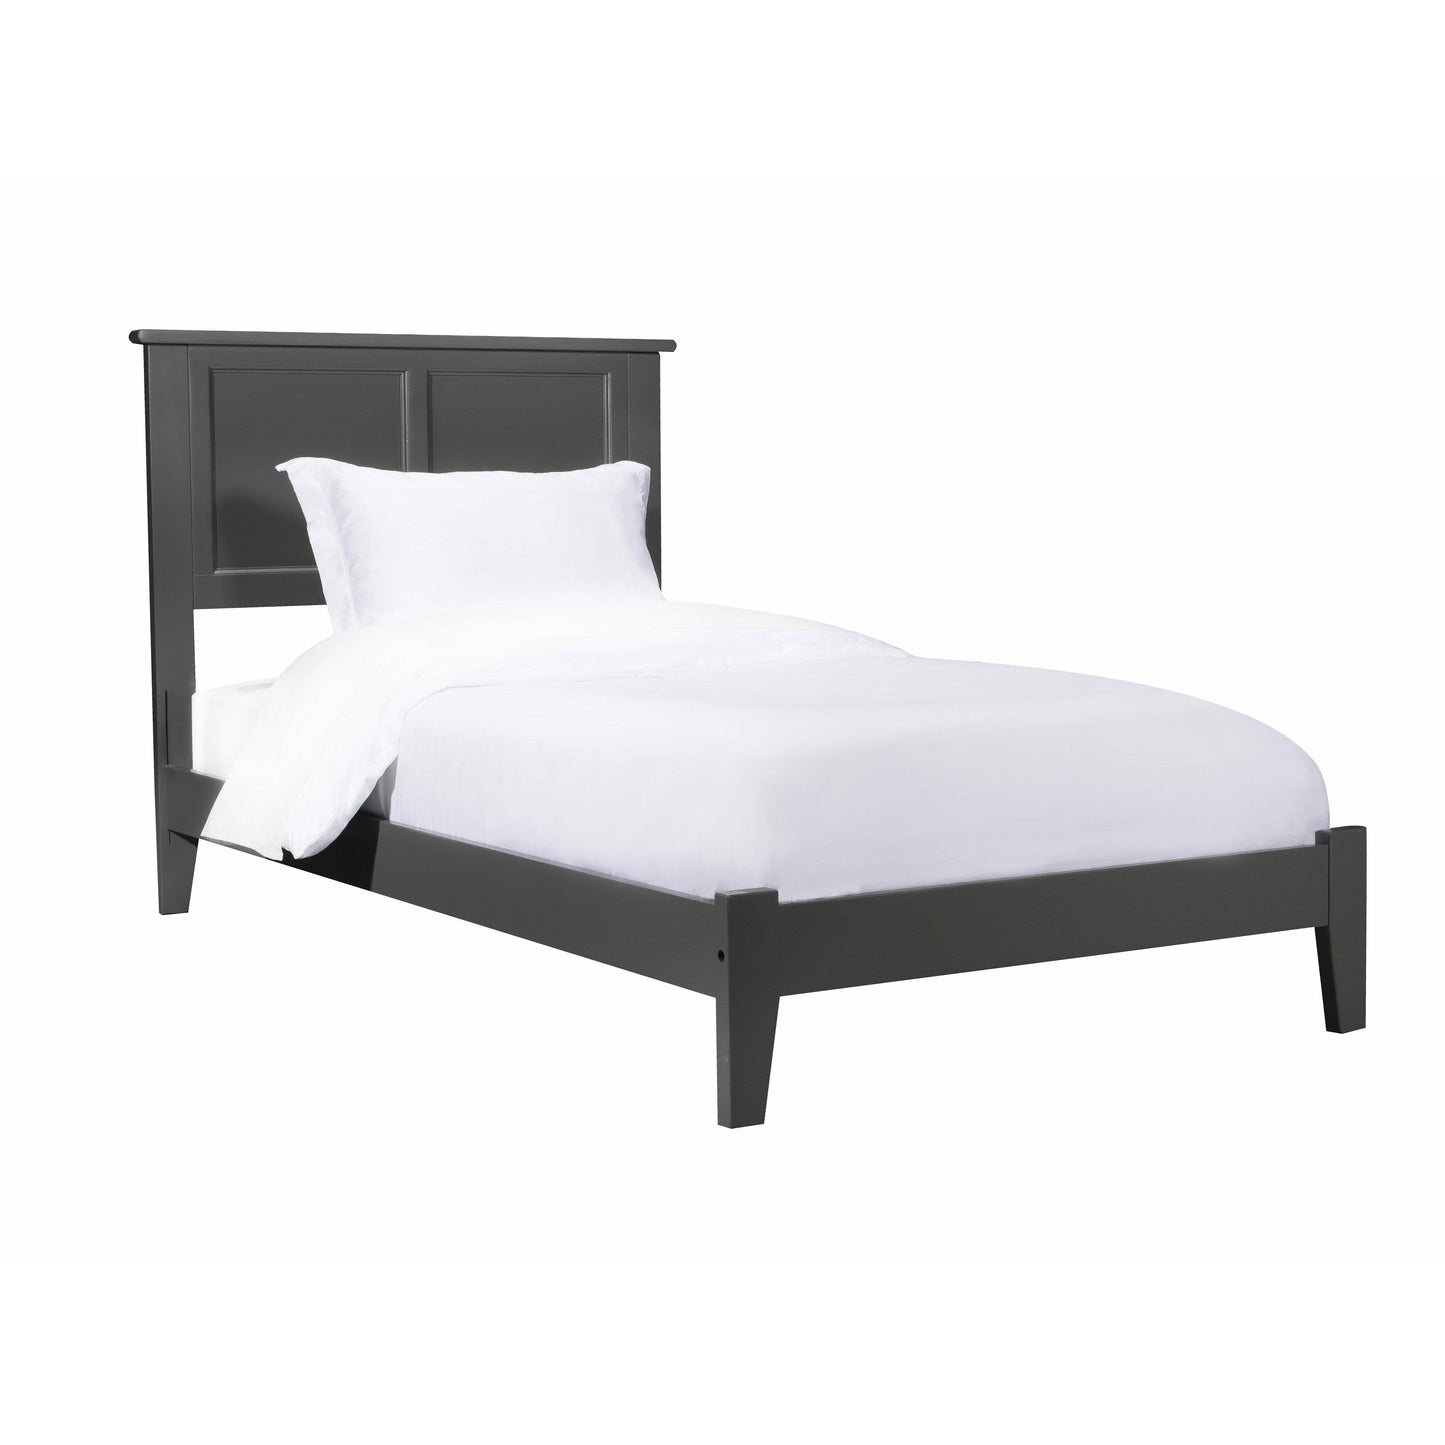 Atlantic Furniture Bed Madison Twin XL Platform Bed with Open Foot Board in Espresso